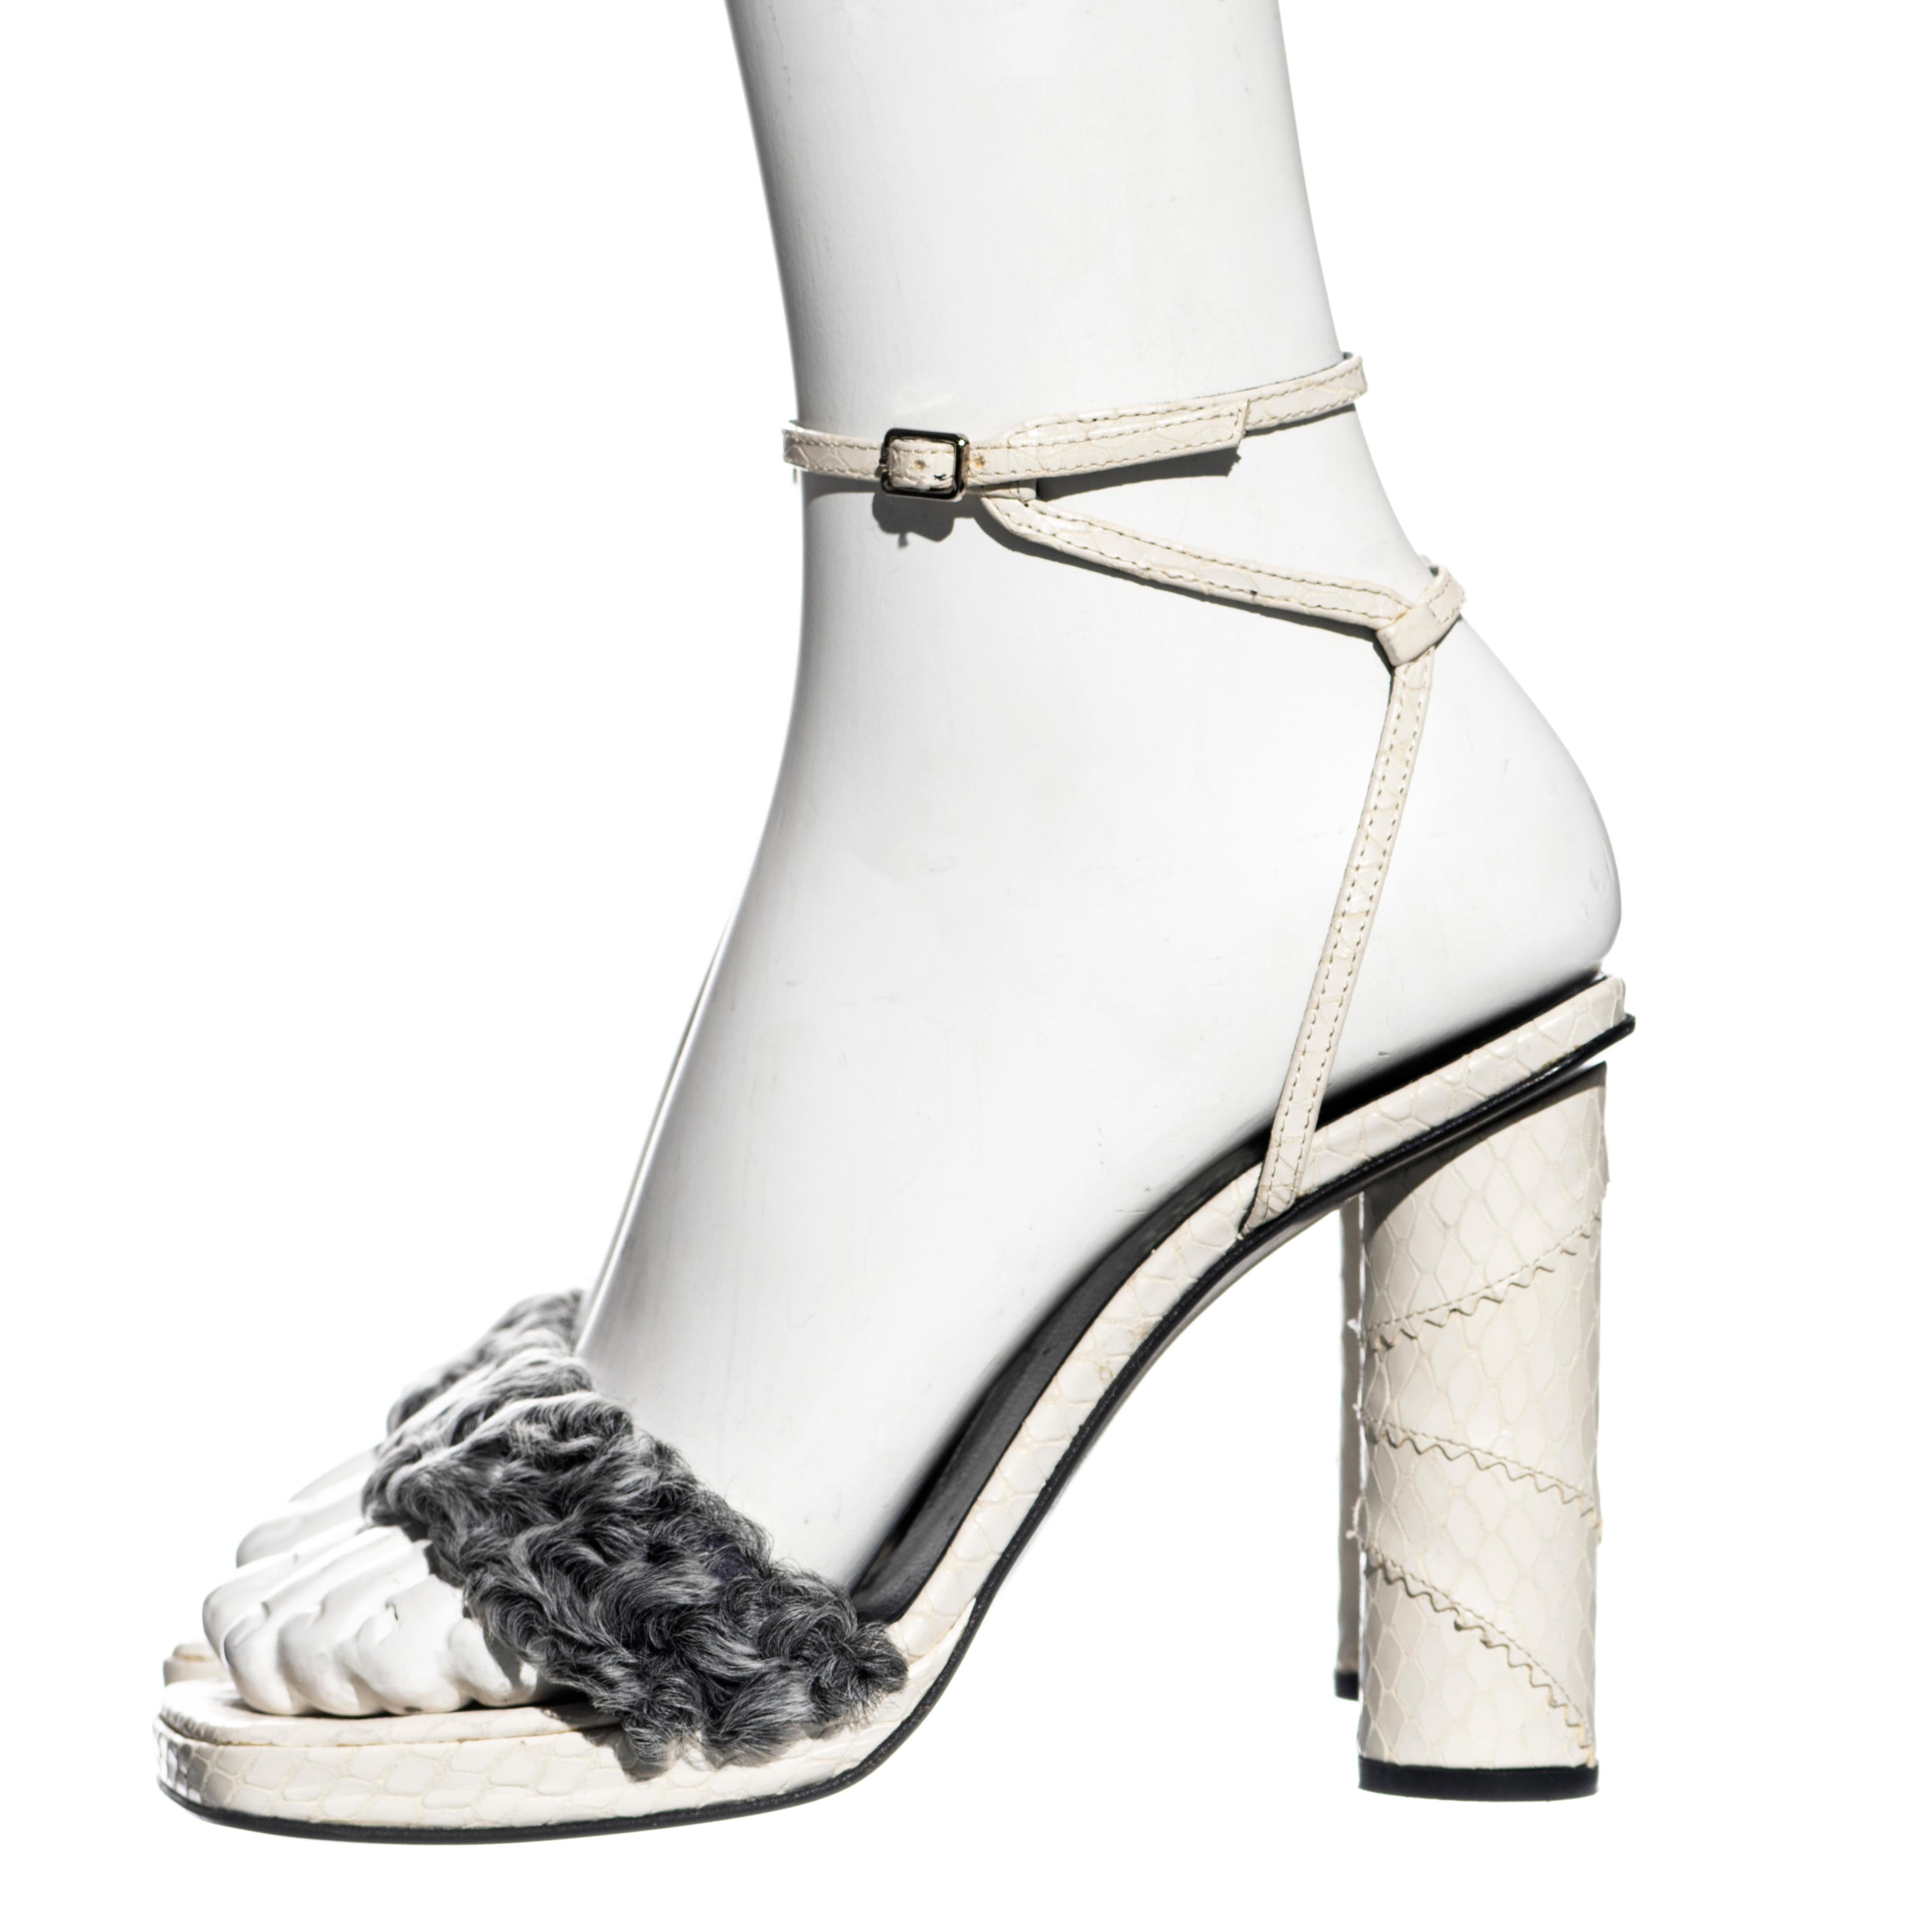 ▪ Gianni Versace platform sandals 
▪ White snakeskin heel, platform and ankle straps 
▪ Grey Persian lamb strap 
▪ Size European 37 
▪ Fall-Winter 1999
▪ Made in Italy